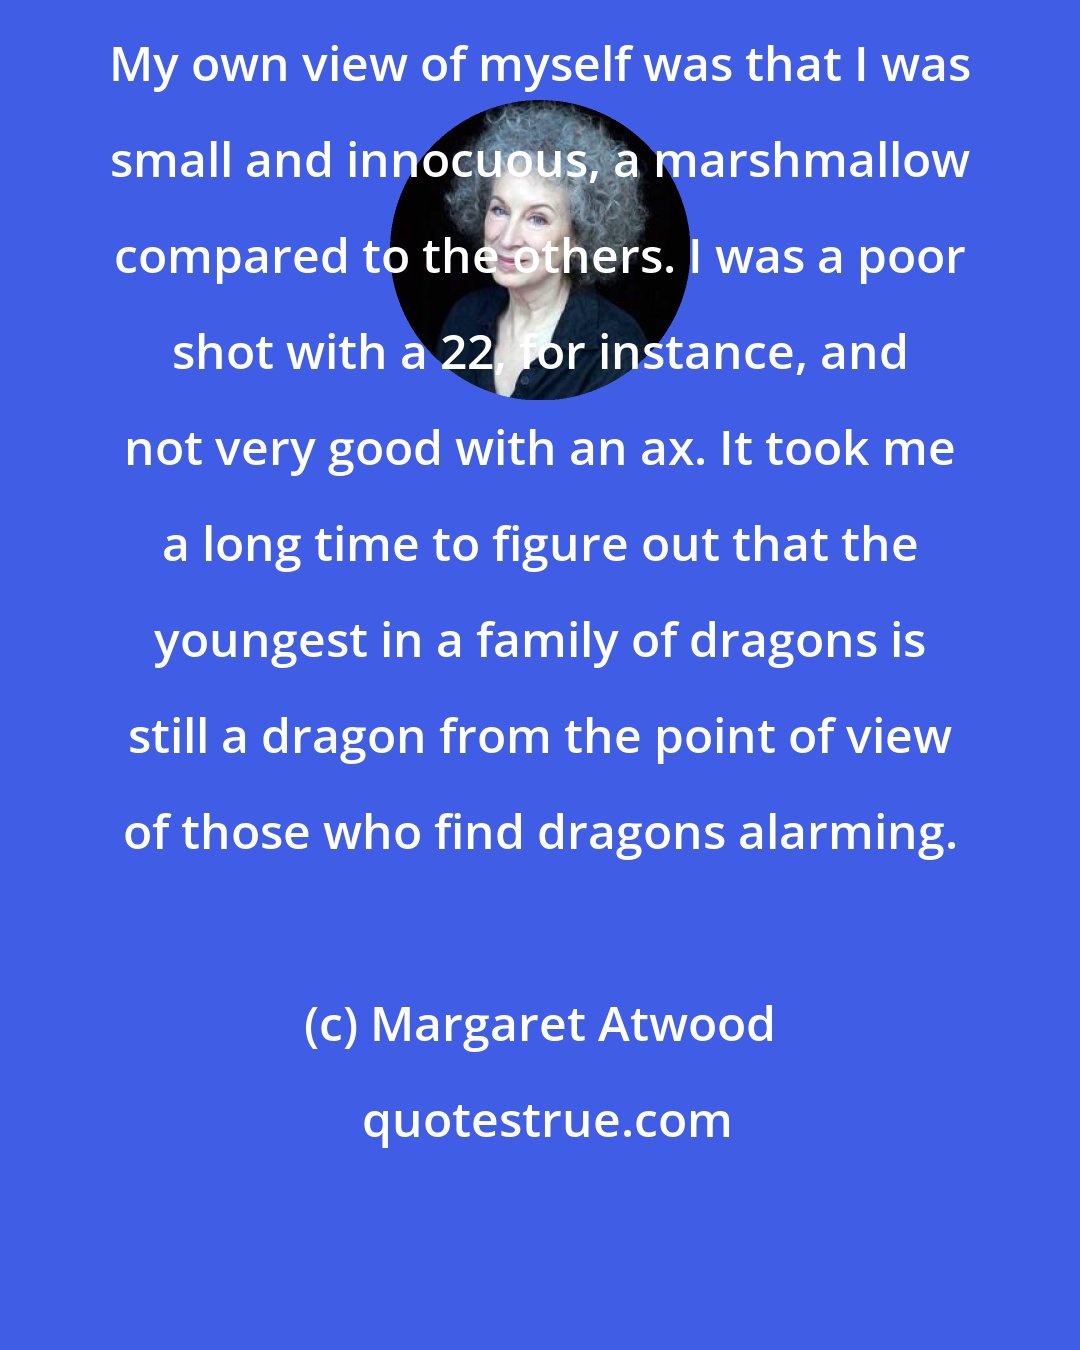 Margaret Atwood: My own view of myself was that I was small and innocuous, a marshmallow compared to the others. I was a poor shot with a 22, for instance, and not very good with an ax. It took me a long time to figure out that the youngest in a family of dragons is still a dragon from the point of view of those who find dragons alarming.